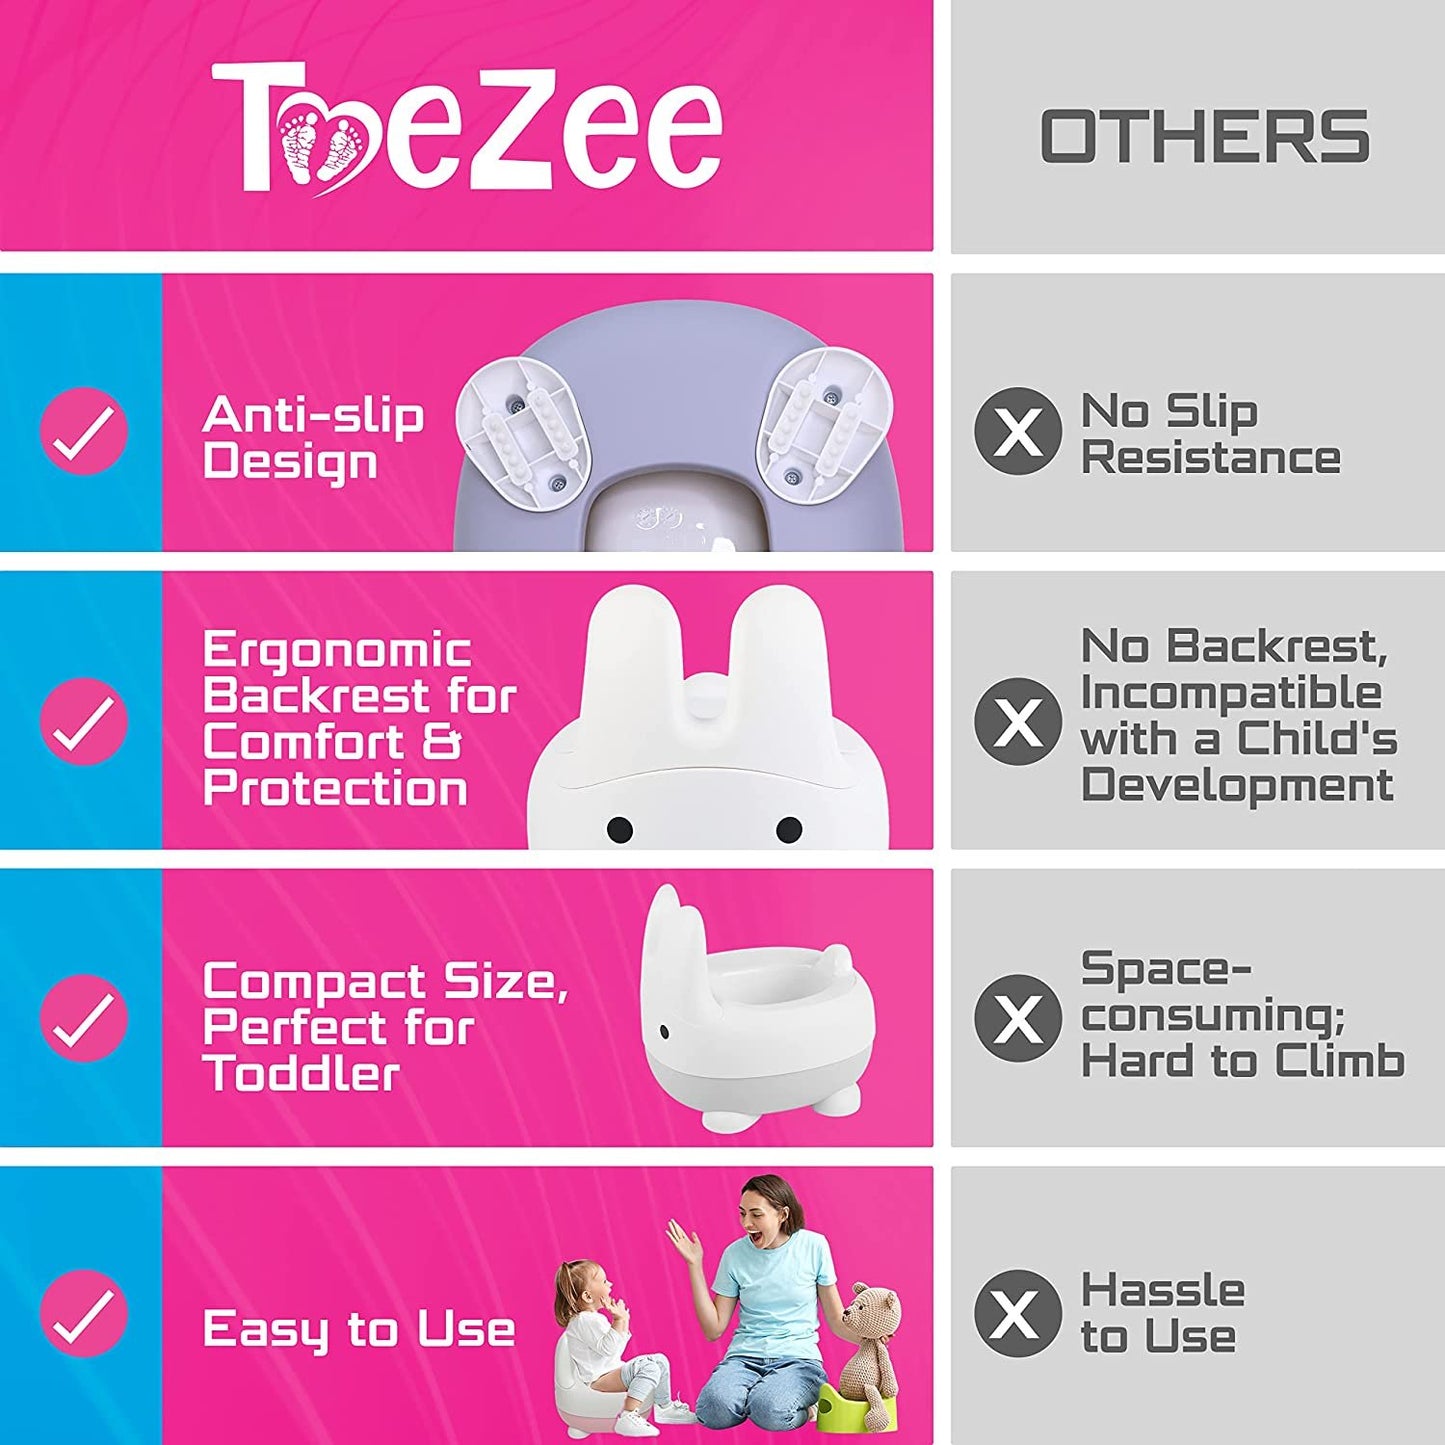 ToeZee Bunny Toddler Potty Training Toilet Seat - Comfortable Toddler Toilet Seat - Easy to Clean Removable Bowl - Non-Slip Kids Potty Chair - Toddler Potty Seat for Boys & Girls (Pink)